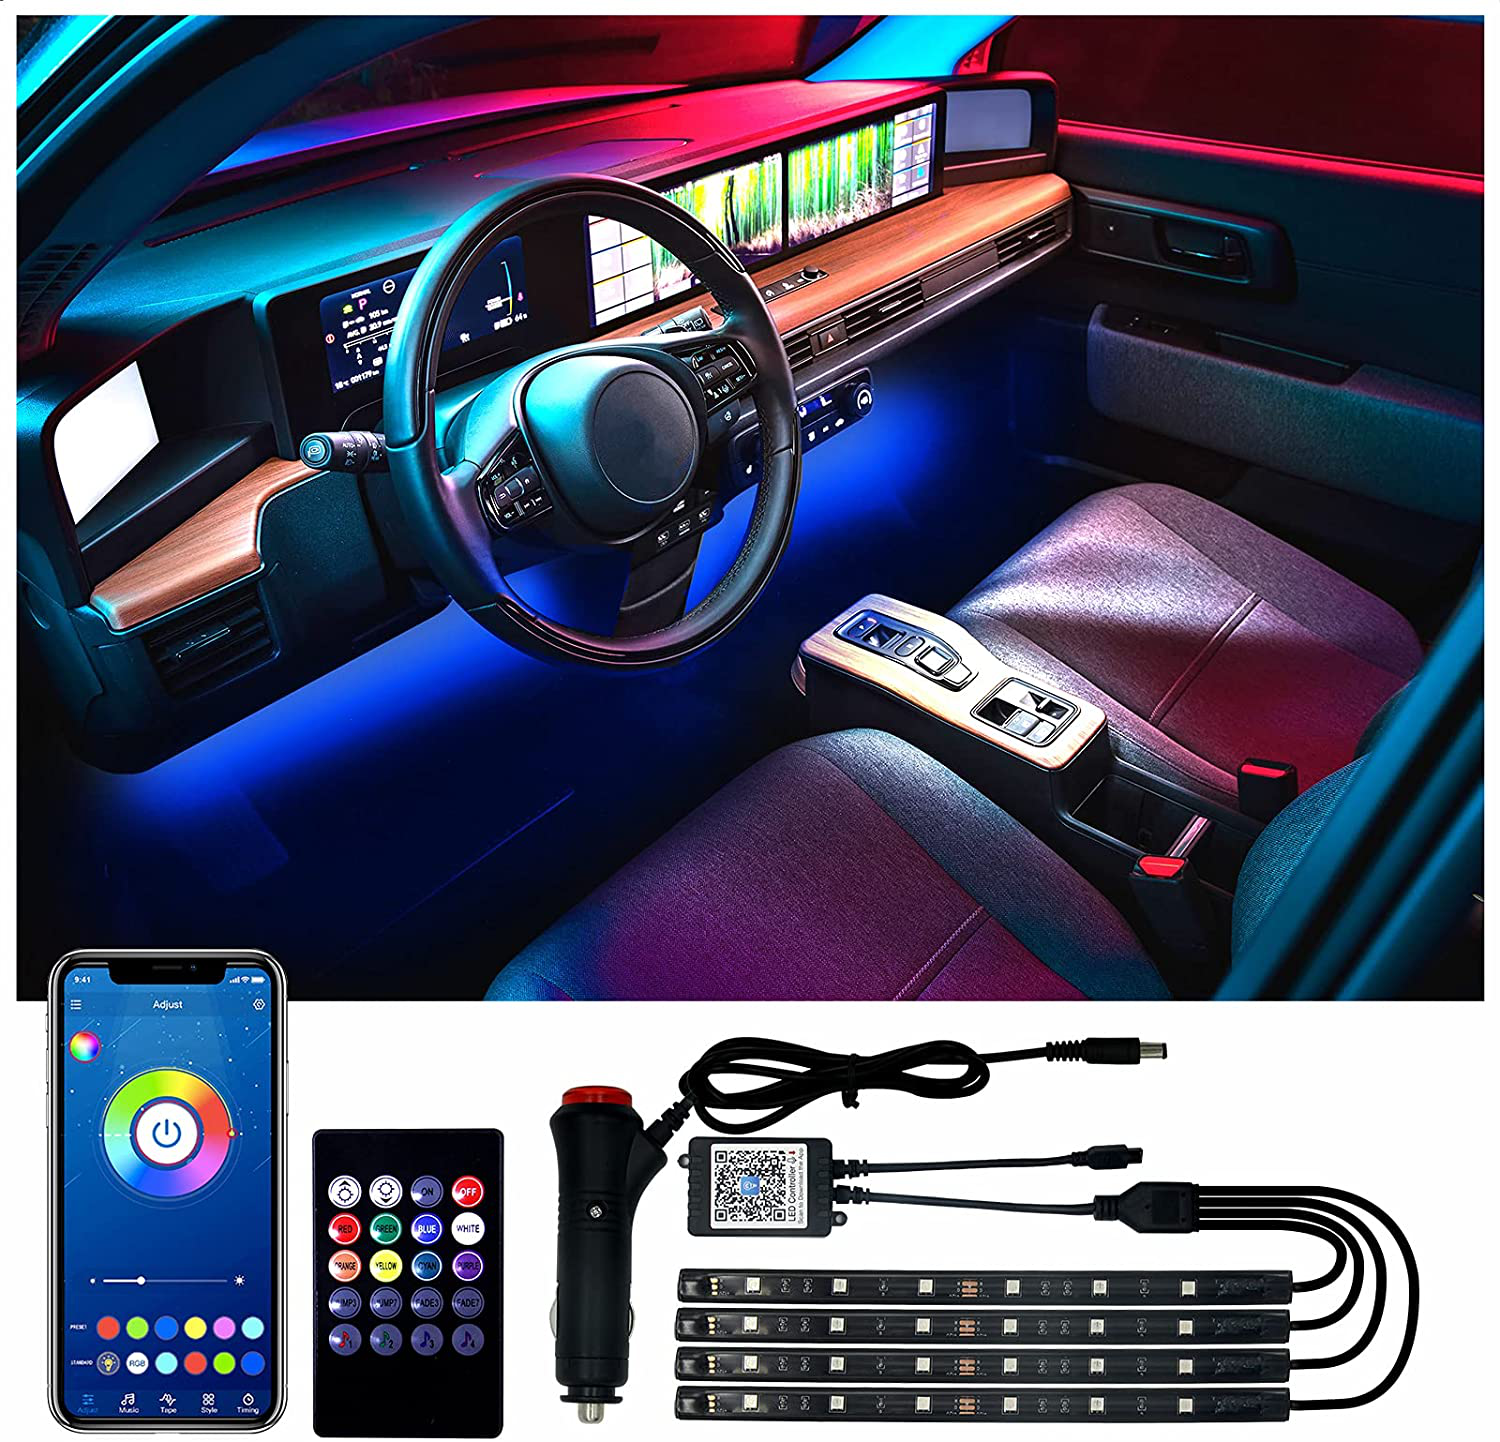 DAYBETTER LED Lights for Car Interior, App Control Car LED Lights Waterproof Design, One Line with 4 Led Strips Color Changing Music Car Lighting with Car Charger DC 12V